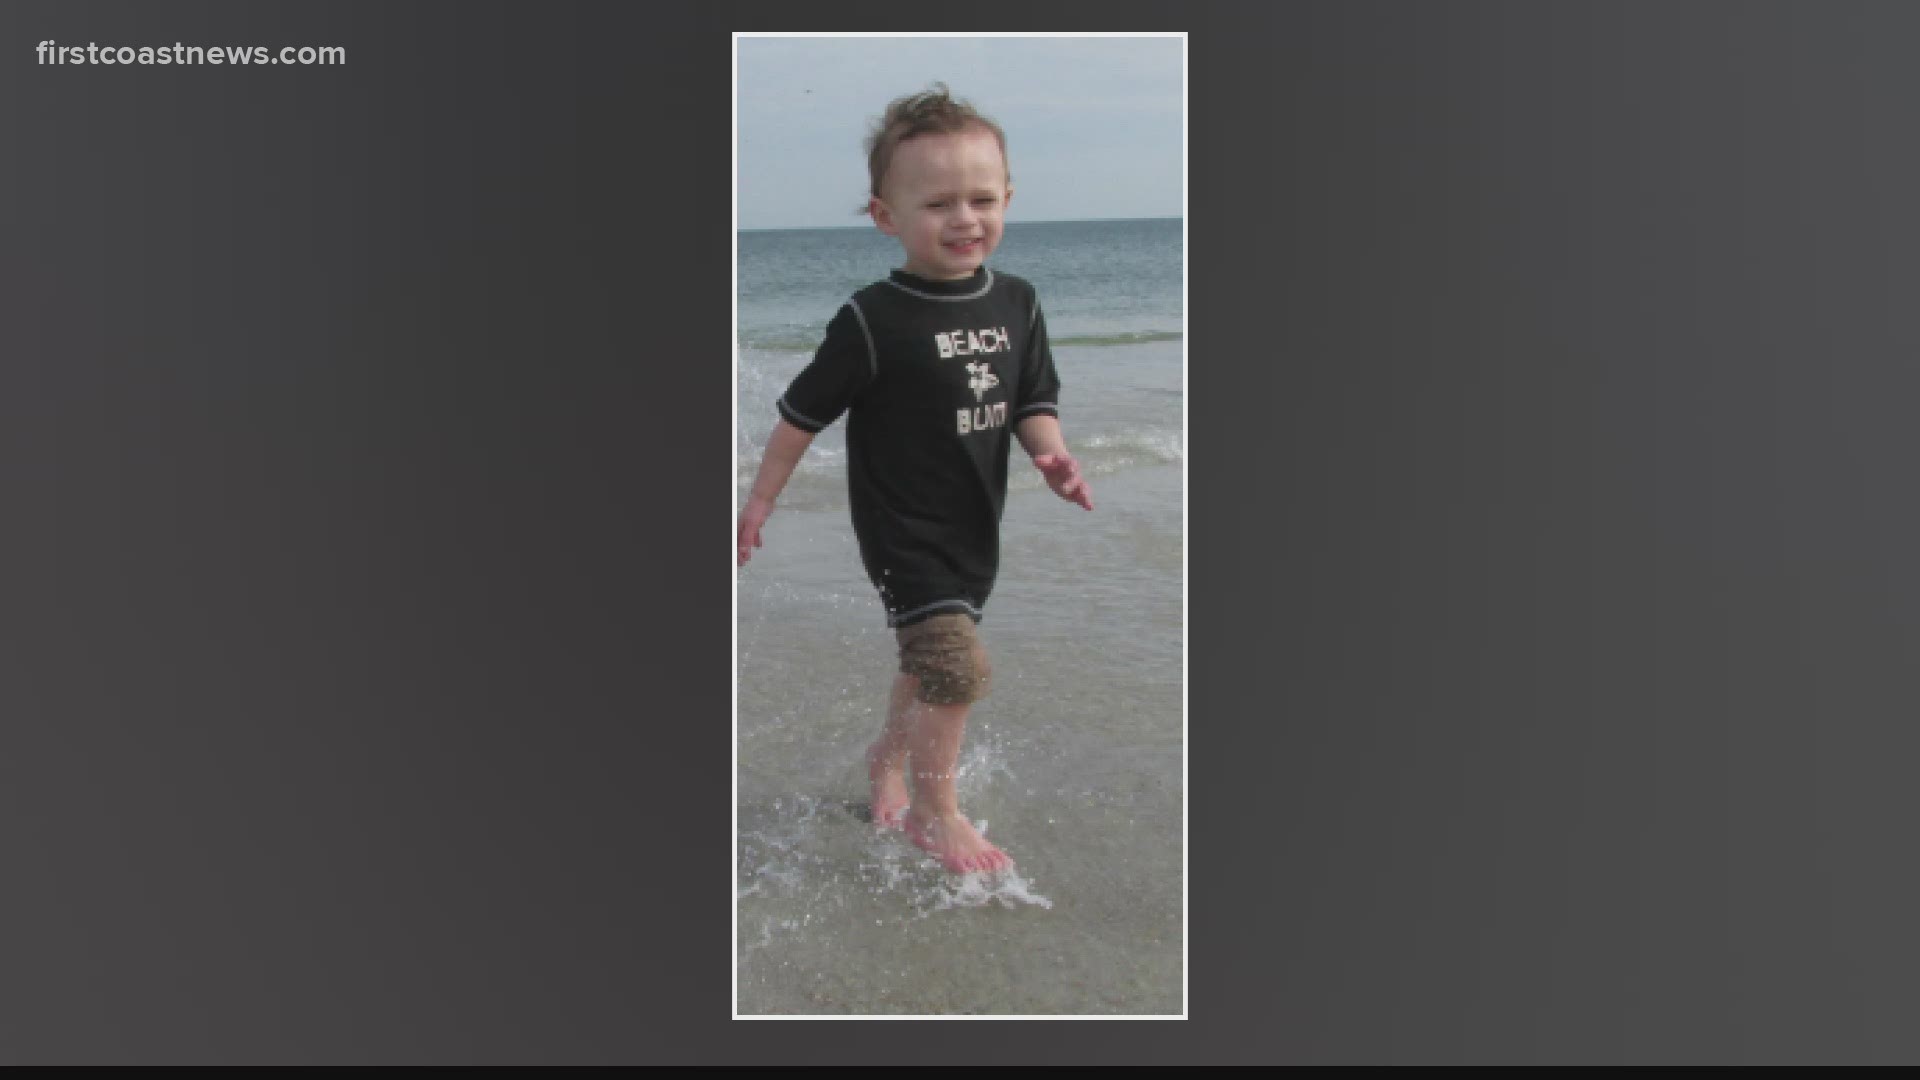 The Jacksonville Sheriff's Office is looking for a missing two-year-old boy that was last seen in the area of St. Johns Bluff Road South.